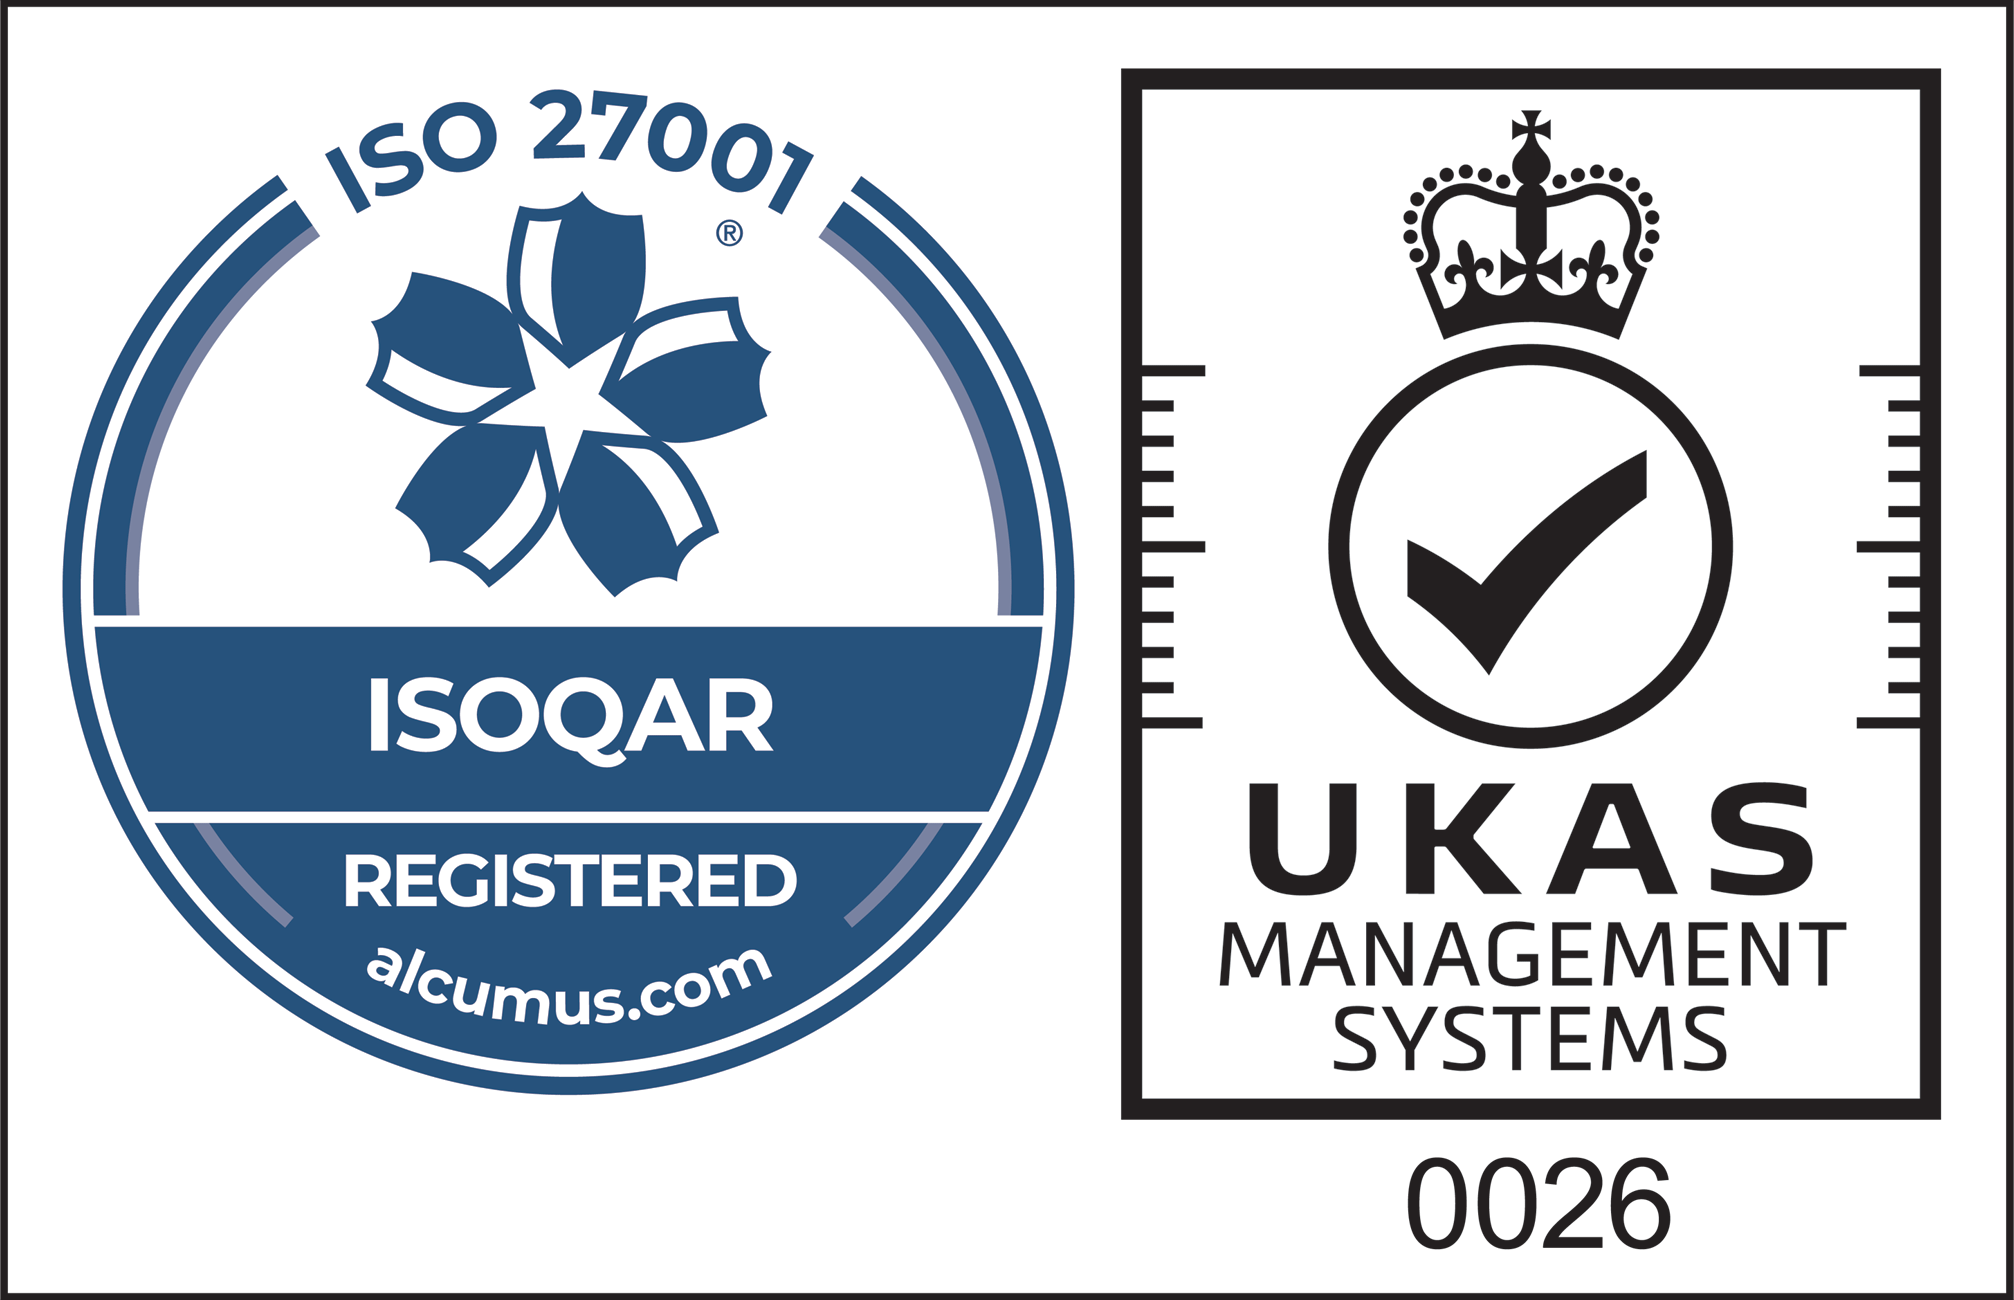 Logos to show that Synthetix is accredited with the ISO27001 and UKAS Management System bodys